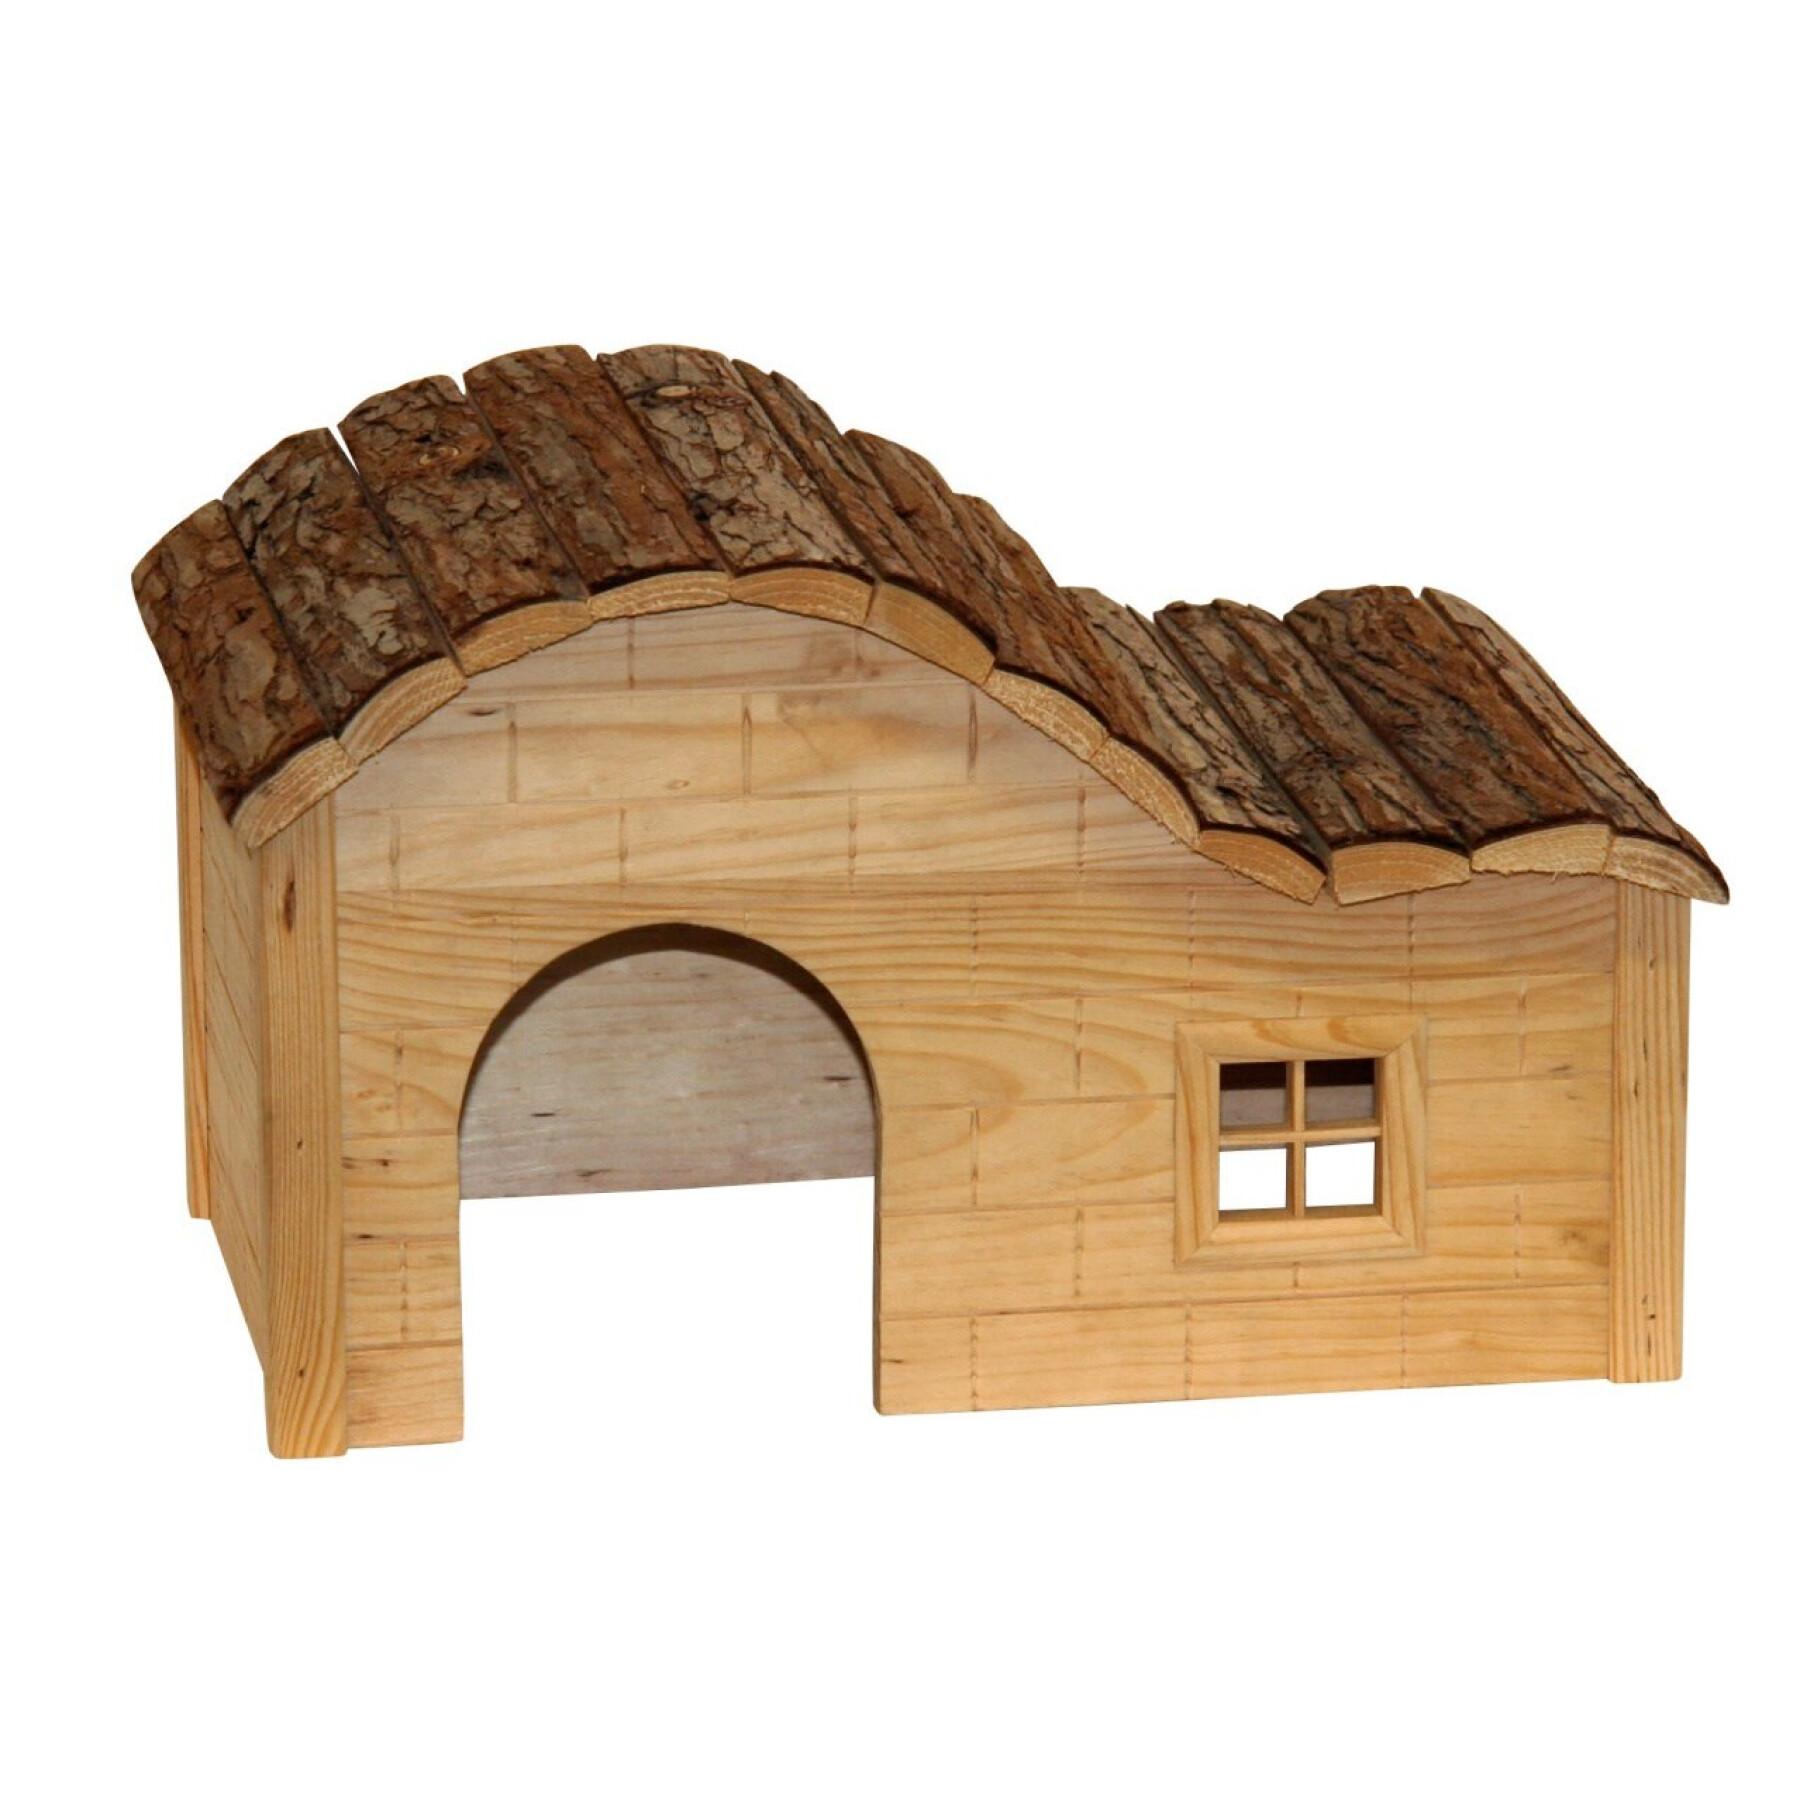 Rodent hut with curved roof Kerbl Nature